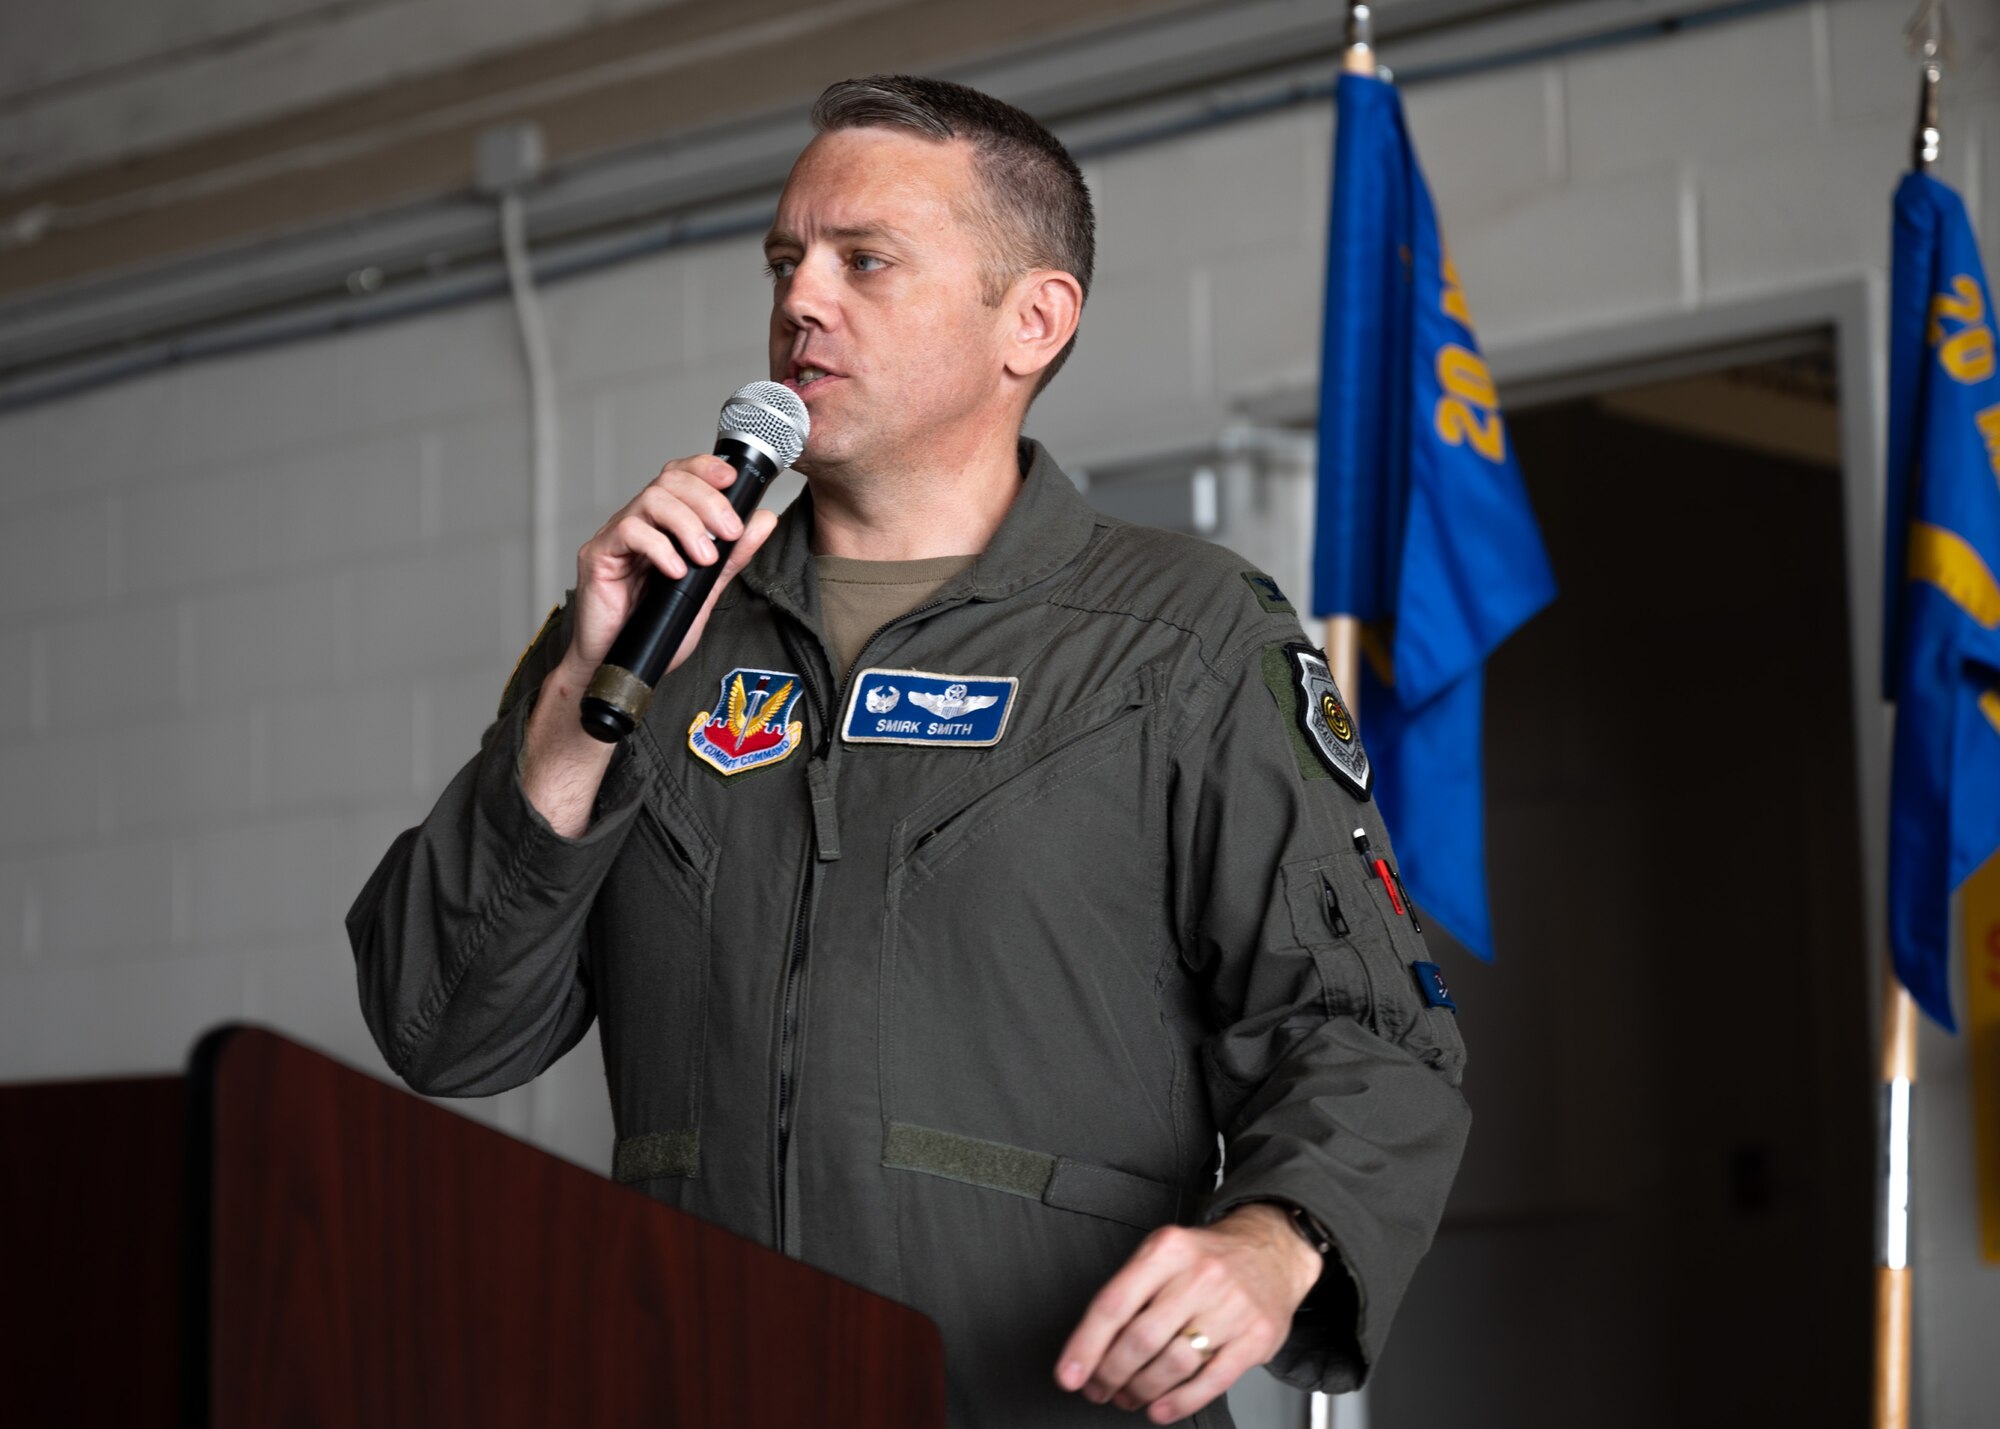 U.S. Air Force Colonel delivers welcome speech at Honorary Commander Induction Ceremony